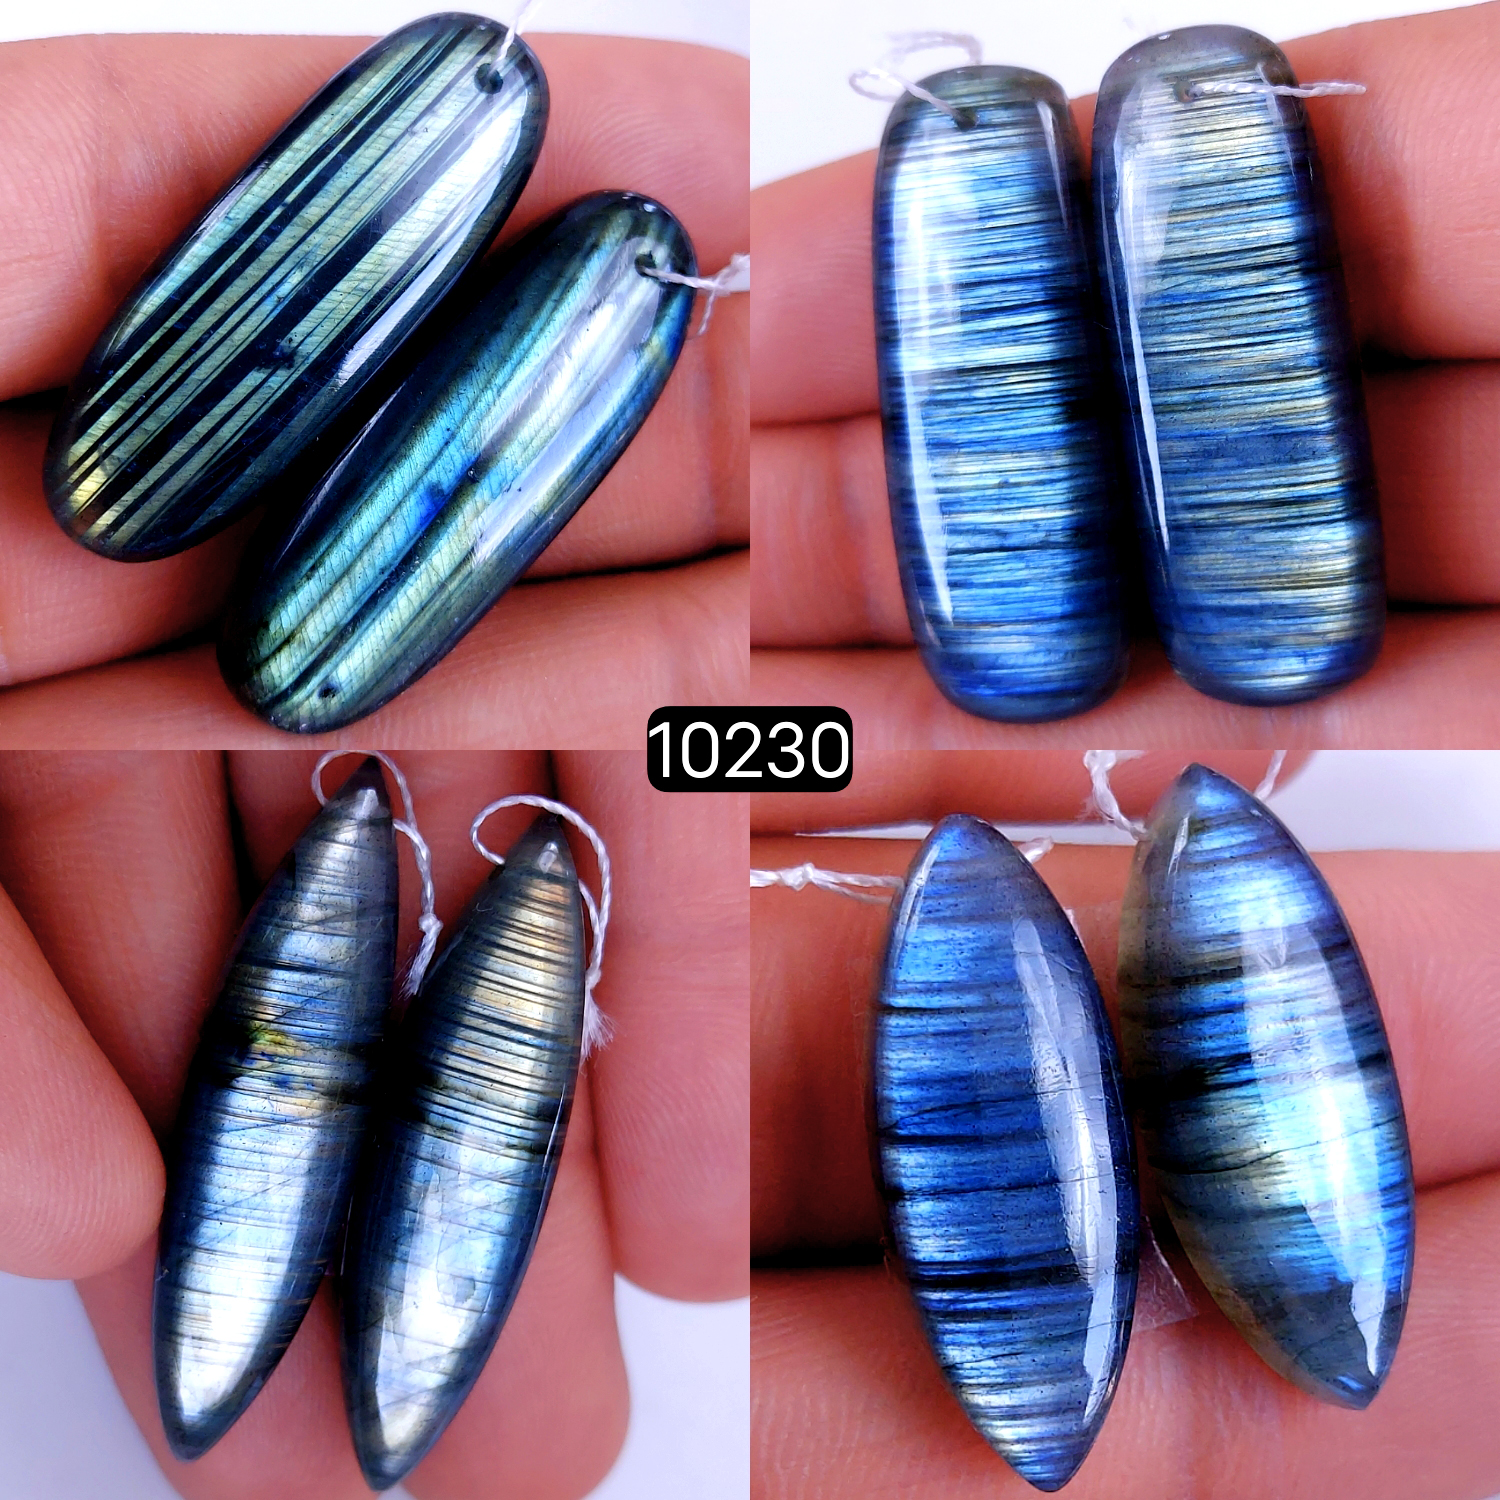 4Pair 193Cts Natural Labradorite Crystal Drill Dangle Drop Earring Pairs Silver Earrings Blue Labradorite Hoop Jewelry  40x15 27x10mm #10230